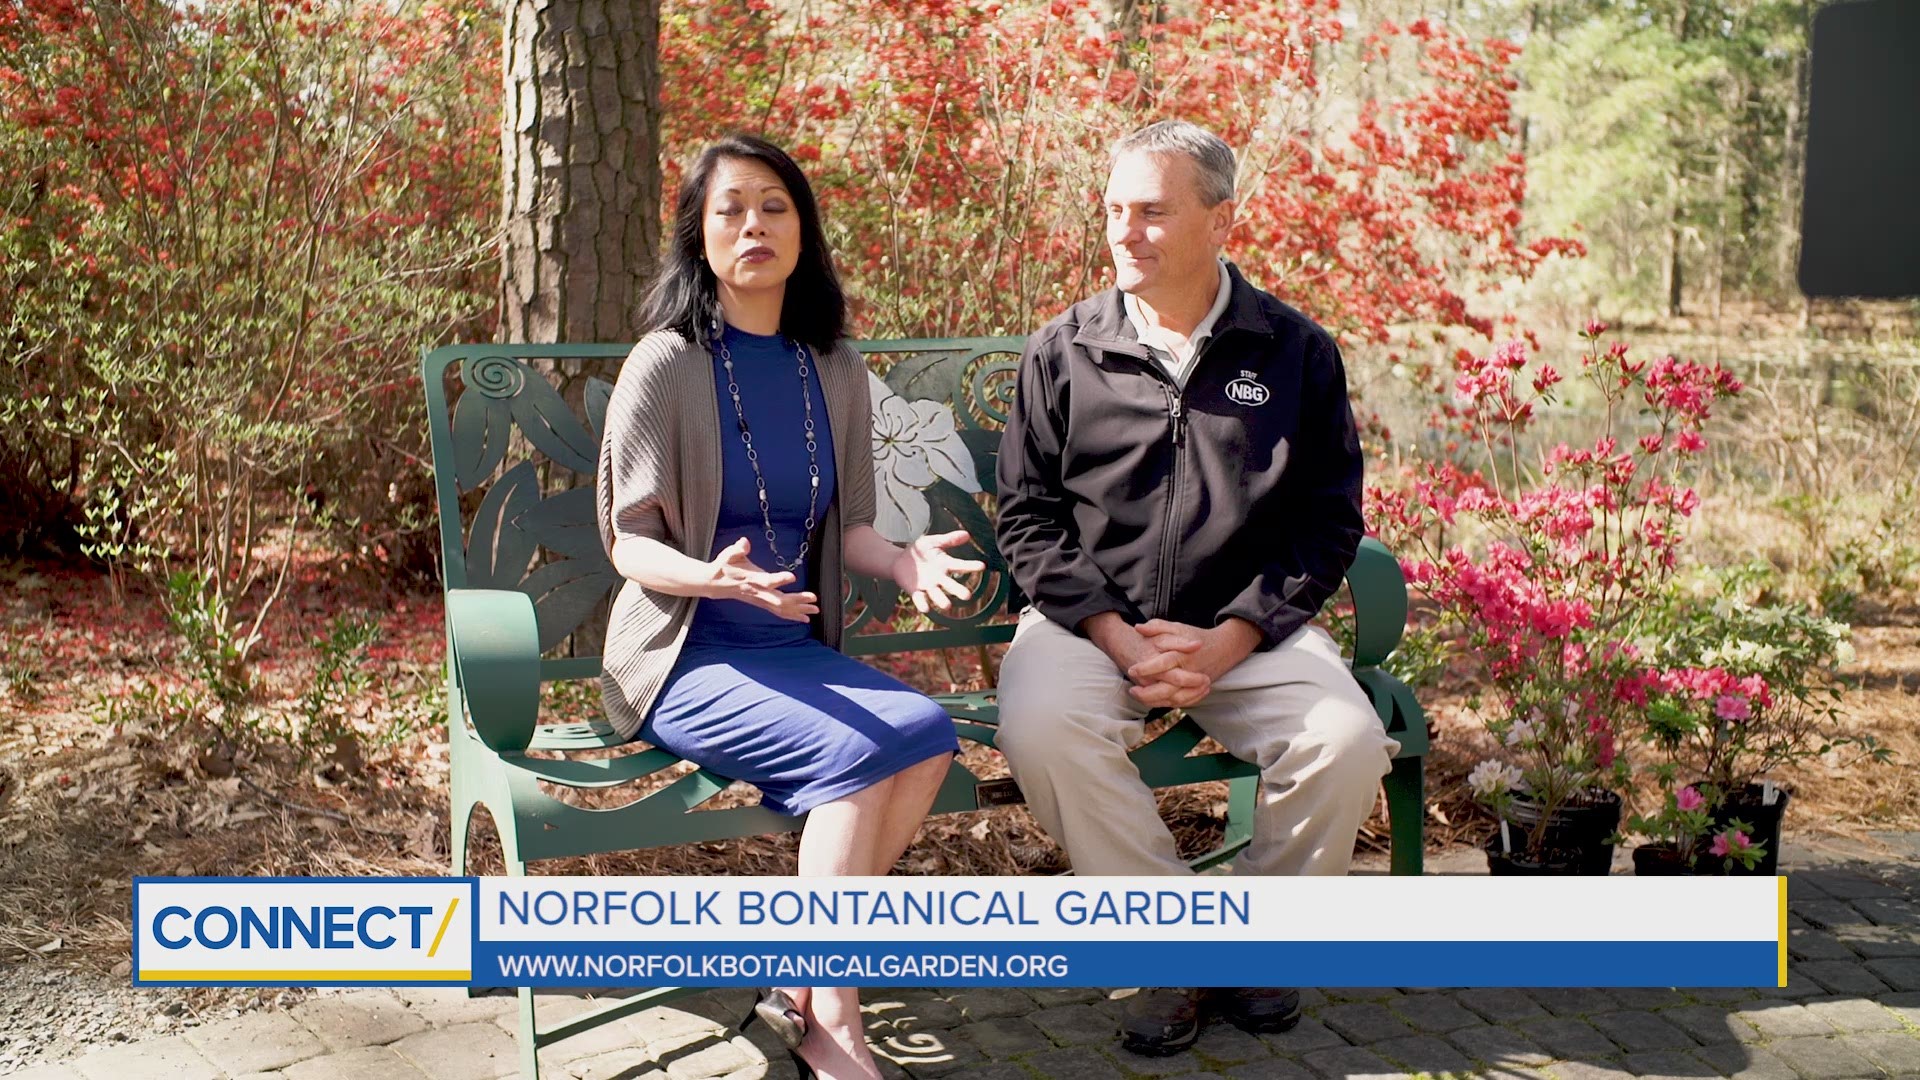 Norfolk Botanical Garden is blooming with beautiful Azaleas!  We spoke with them ahead of the WPA Garden Heritage Celebration – honoring the 220 African Americans who cleared swampy land and planted the first Azaleas.